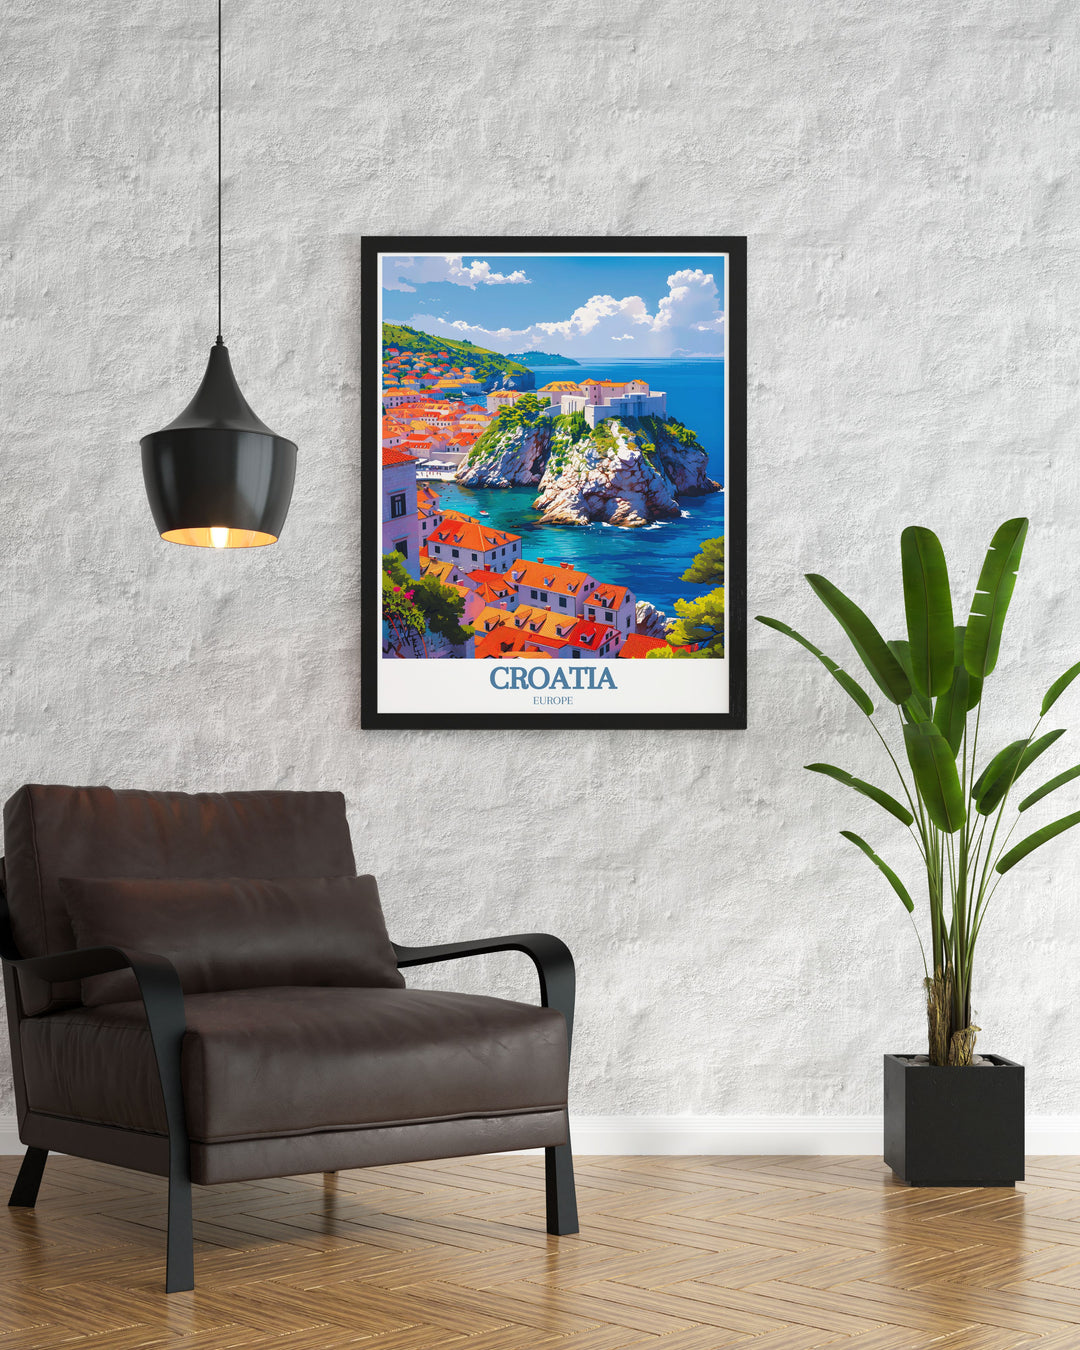 This poster showcases the picturesque streets of Dubrovnik Old Town and the serene waters of the Adriatic Sea, adding a unique touch of Croatias historical and natural beauty to your living space.